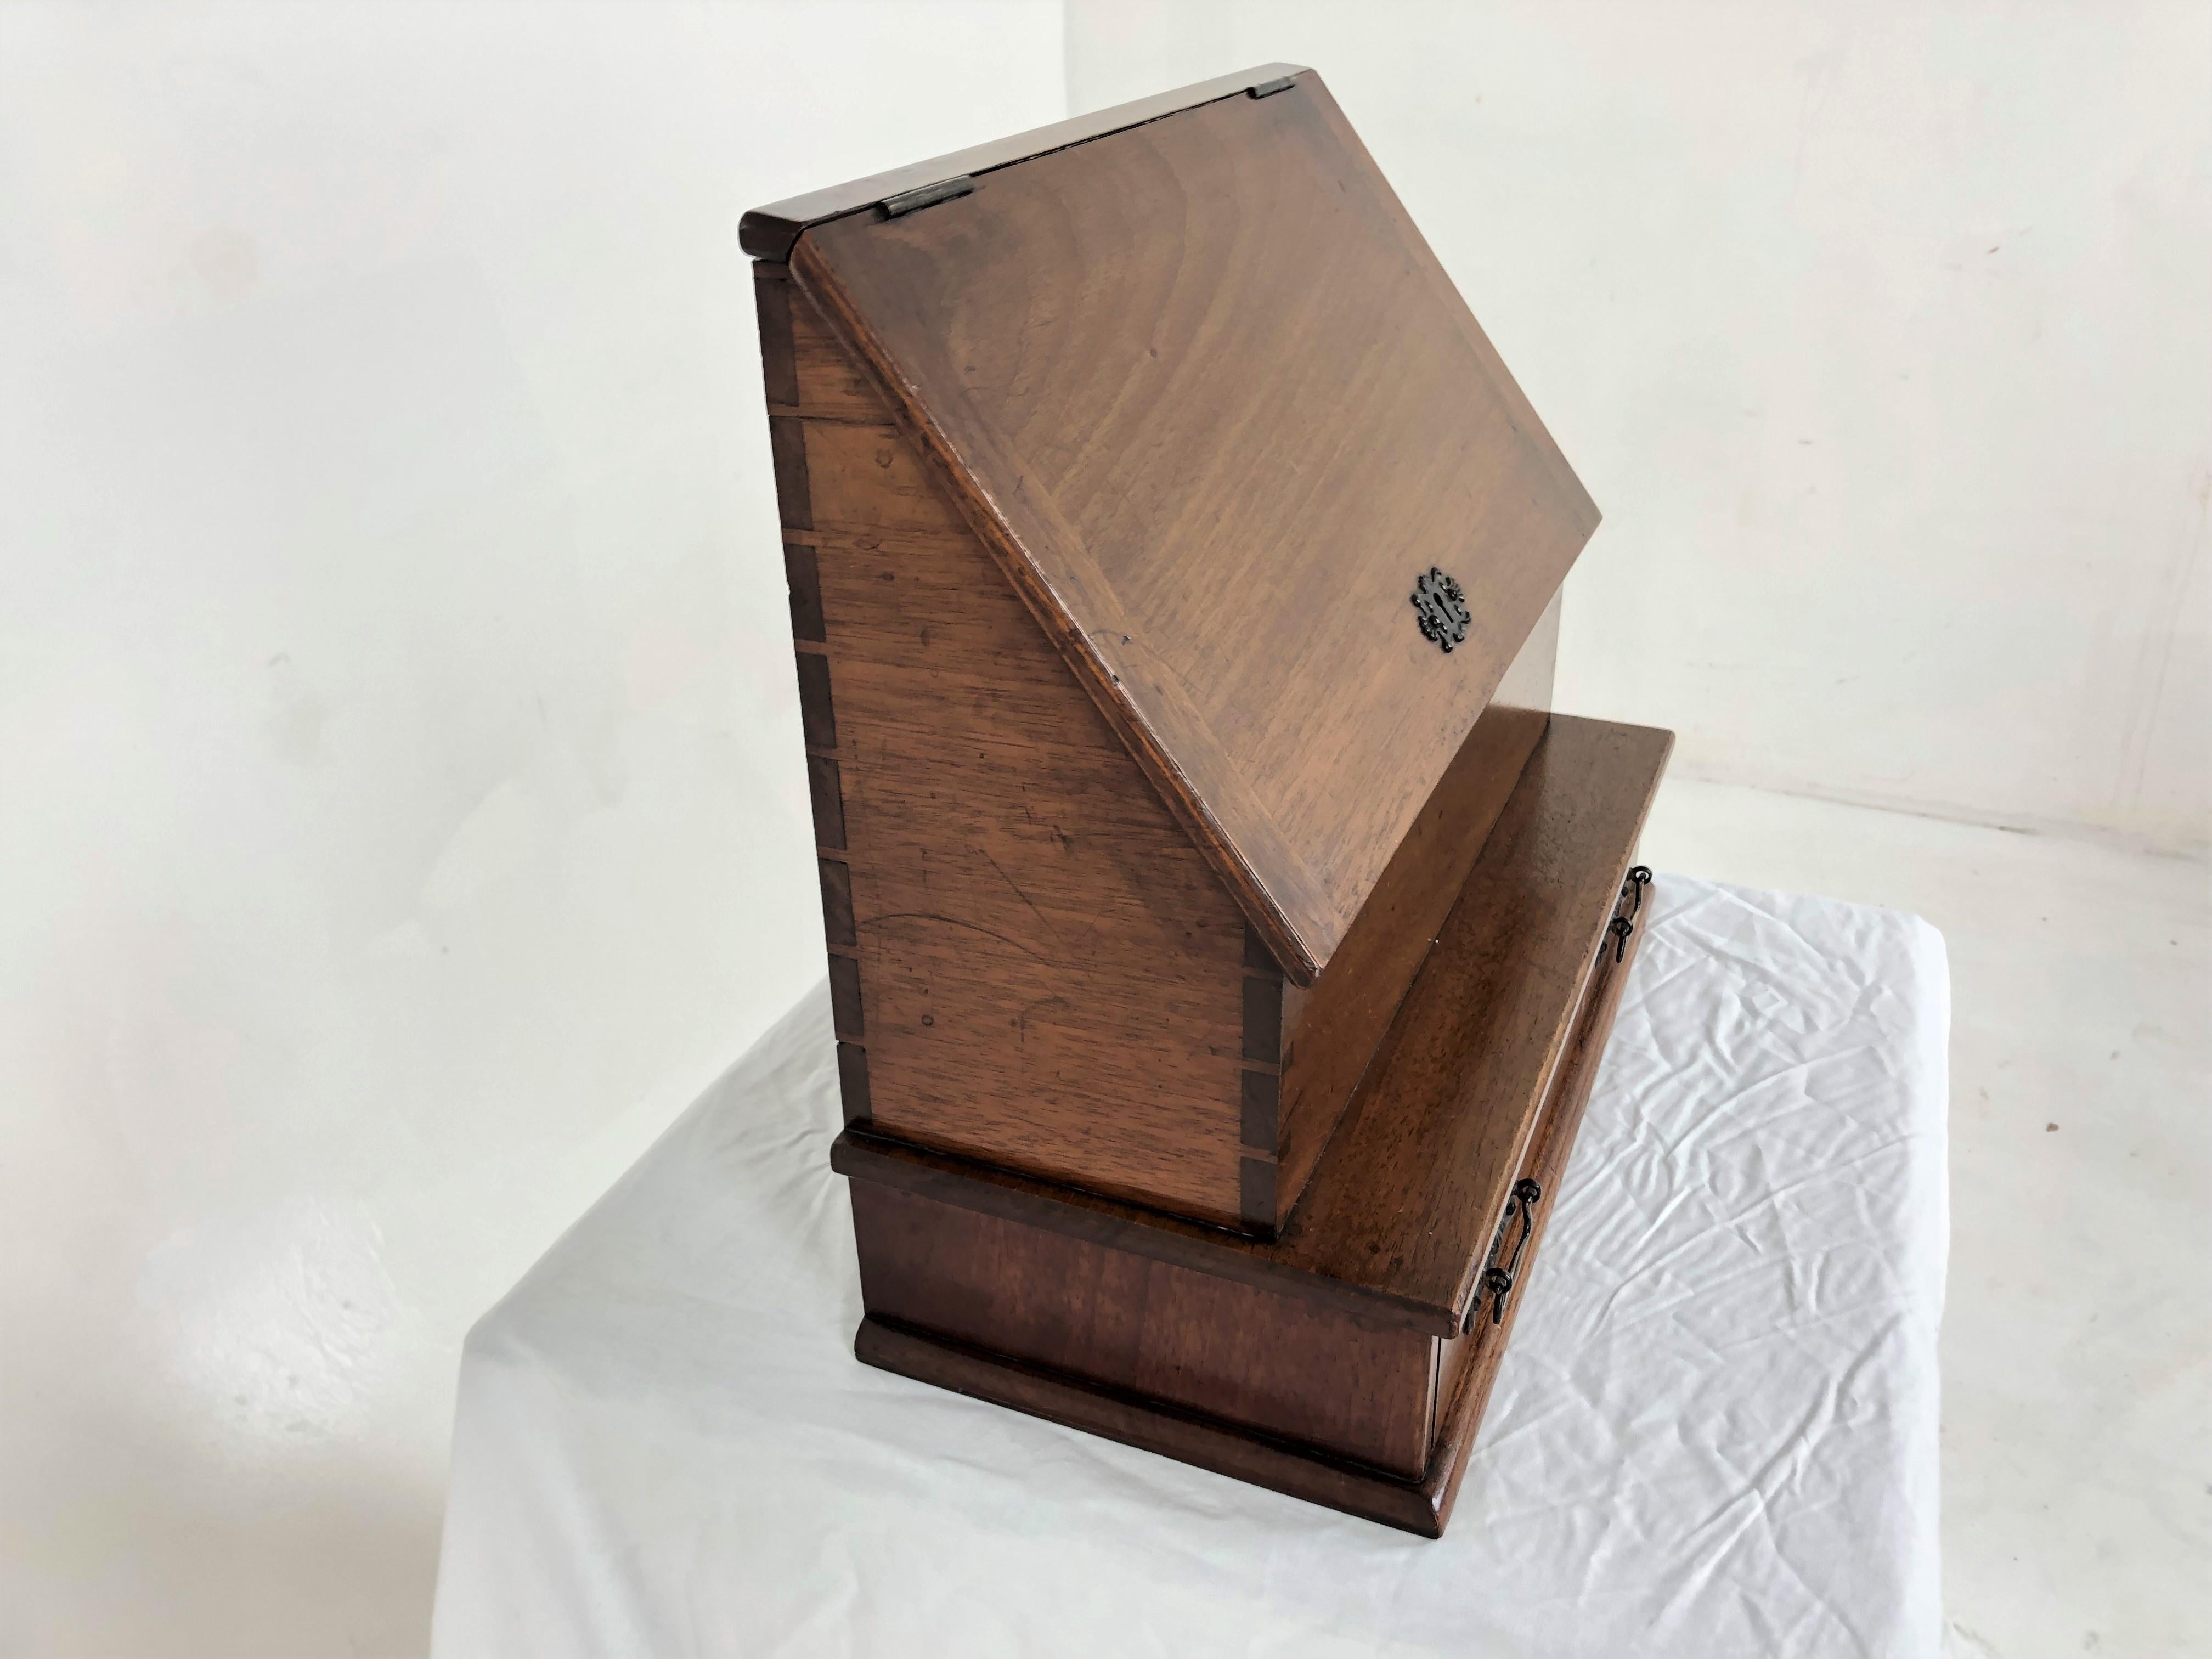 Antique Victorian walnut Art Nouveau stationary box with letter racks, Scotland 1905, H831

Scotland 1905
Solid Walnut
Original finish
Slanted top with dovetailed ends
Opens to reveal interior letter paper racks
Small shelf below
Single